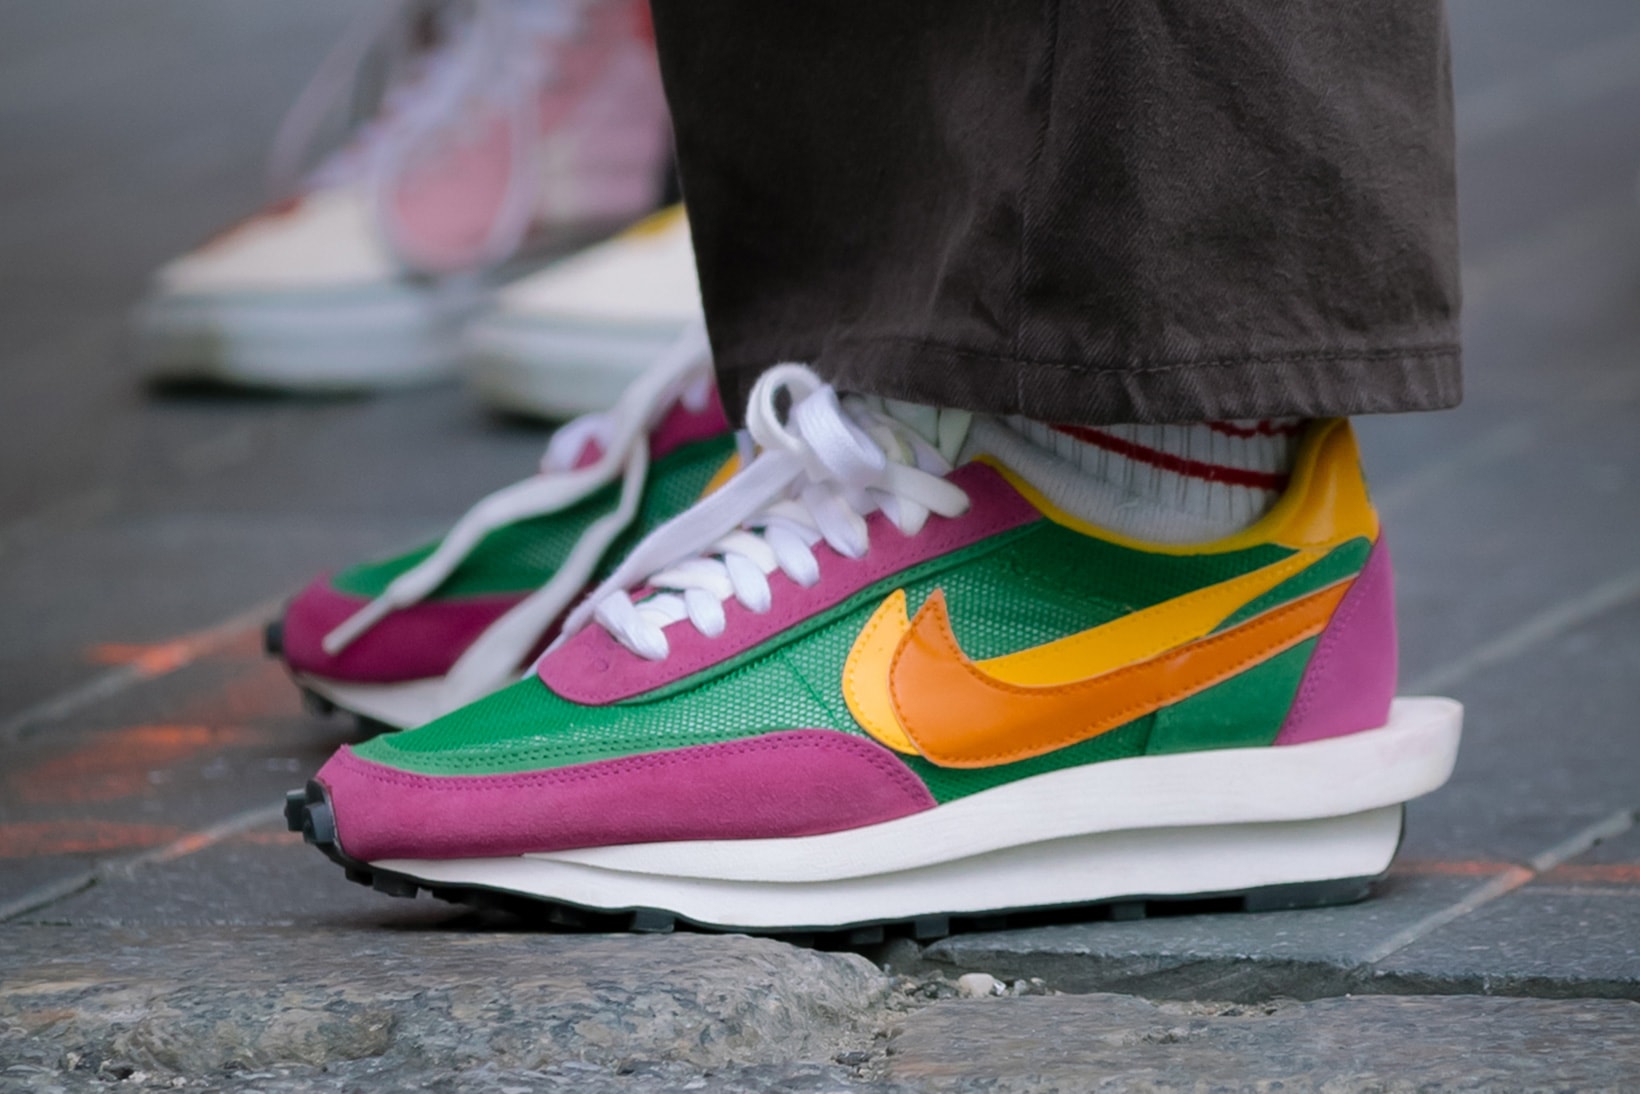 Sacai Nike Sneakers LDWaffle New York Fashion Week SS22 Best Street Style Trends Spring Summer 2022 Influencer